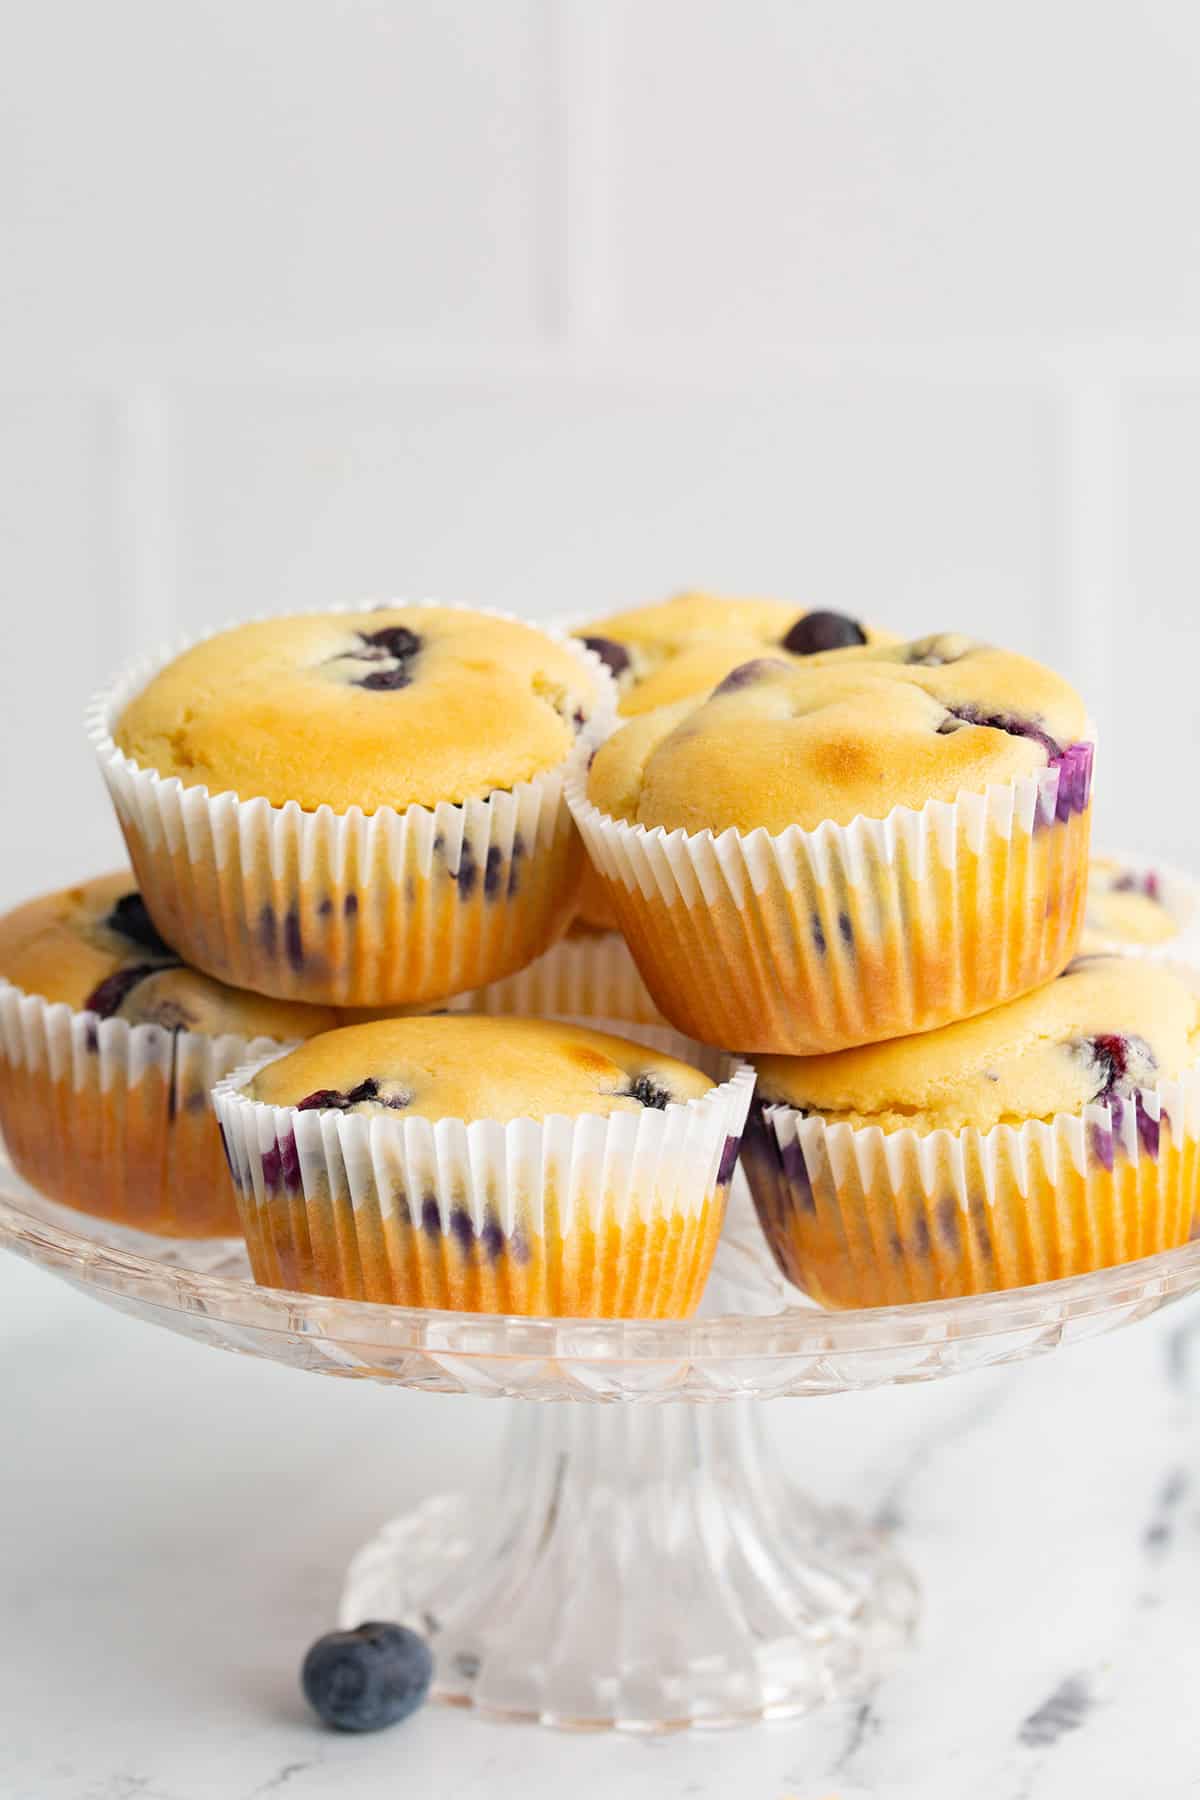 Keto Blueberry Muffins arranged on a glass cake stand.